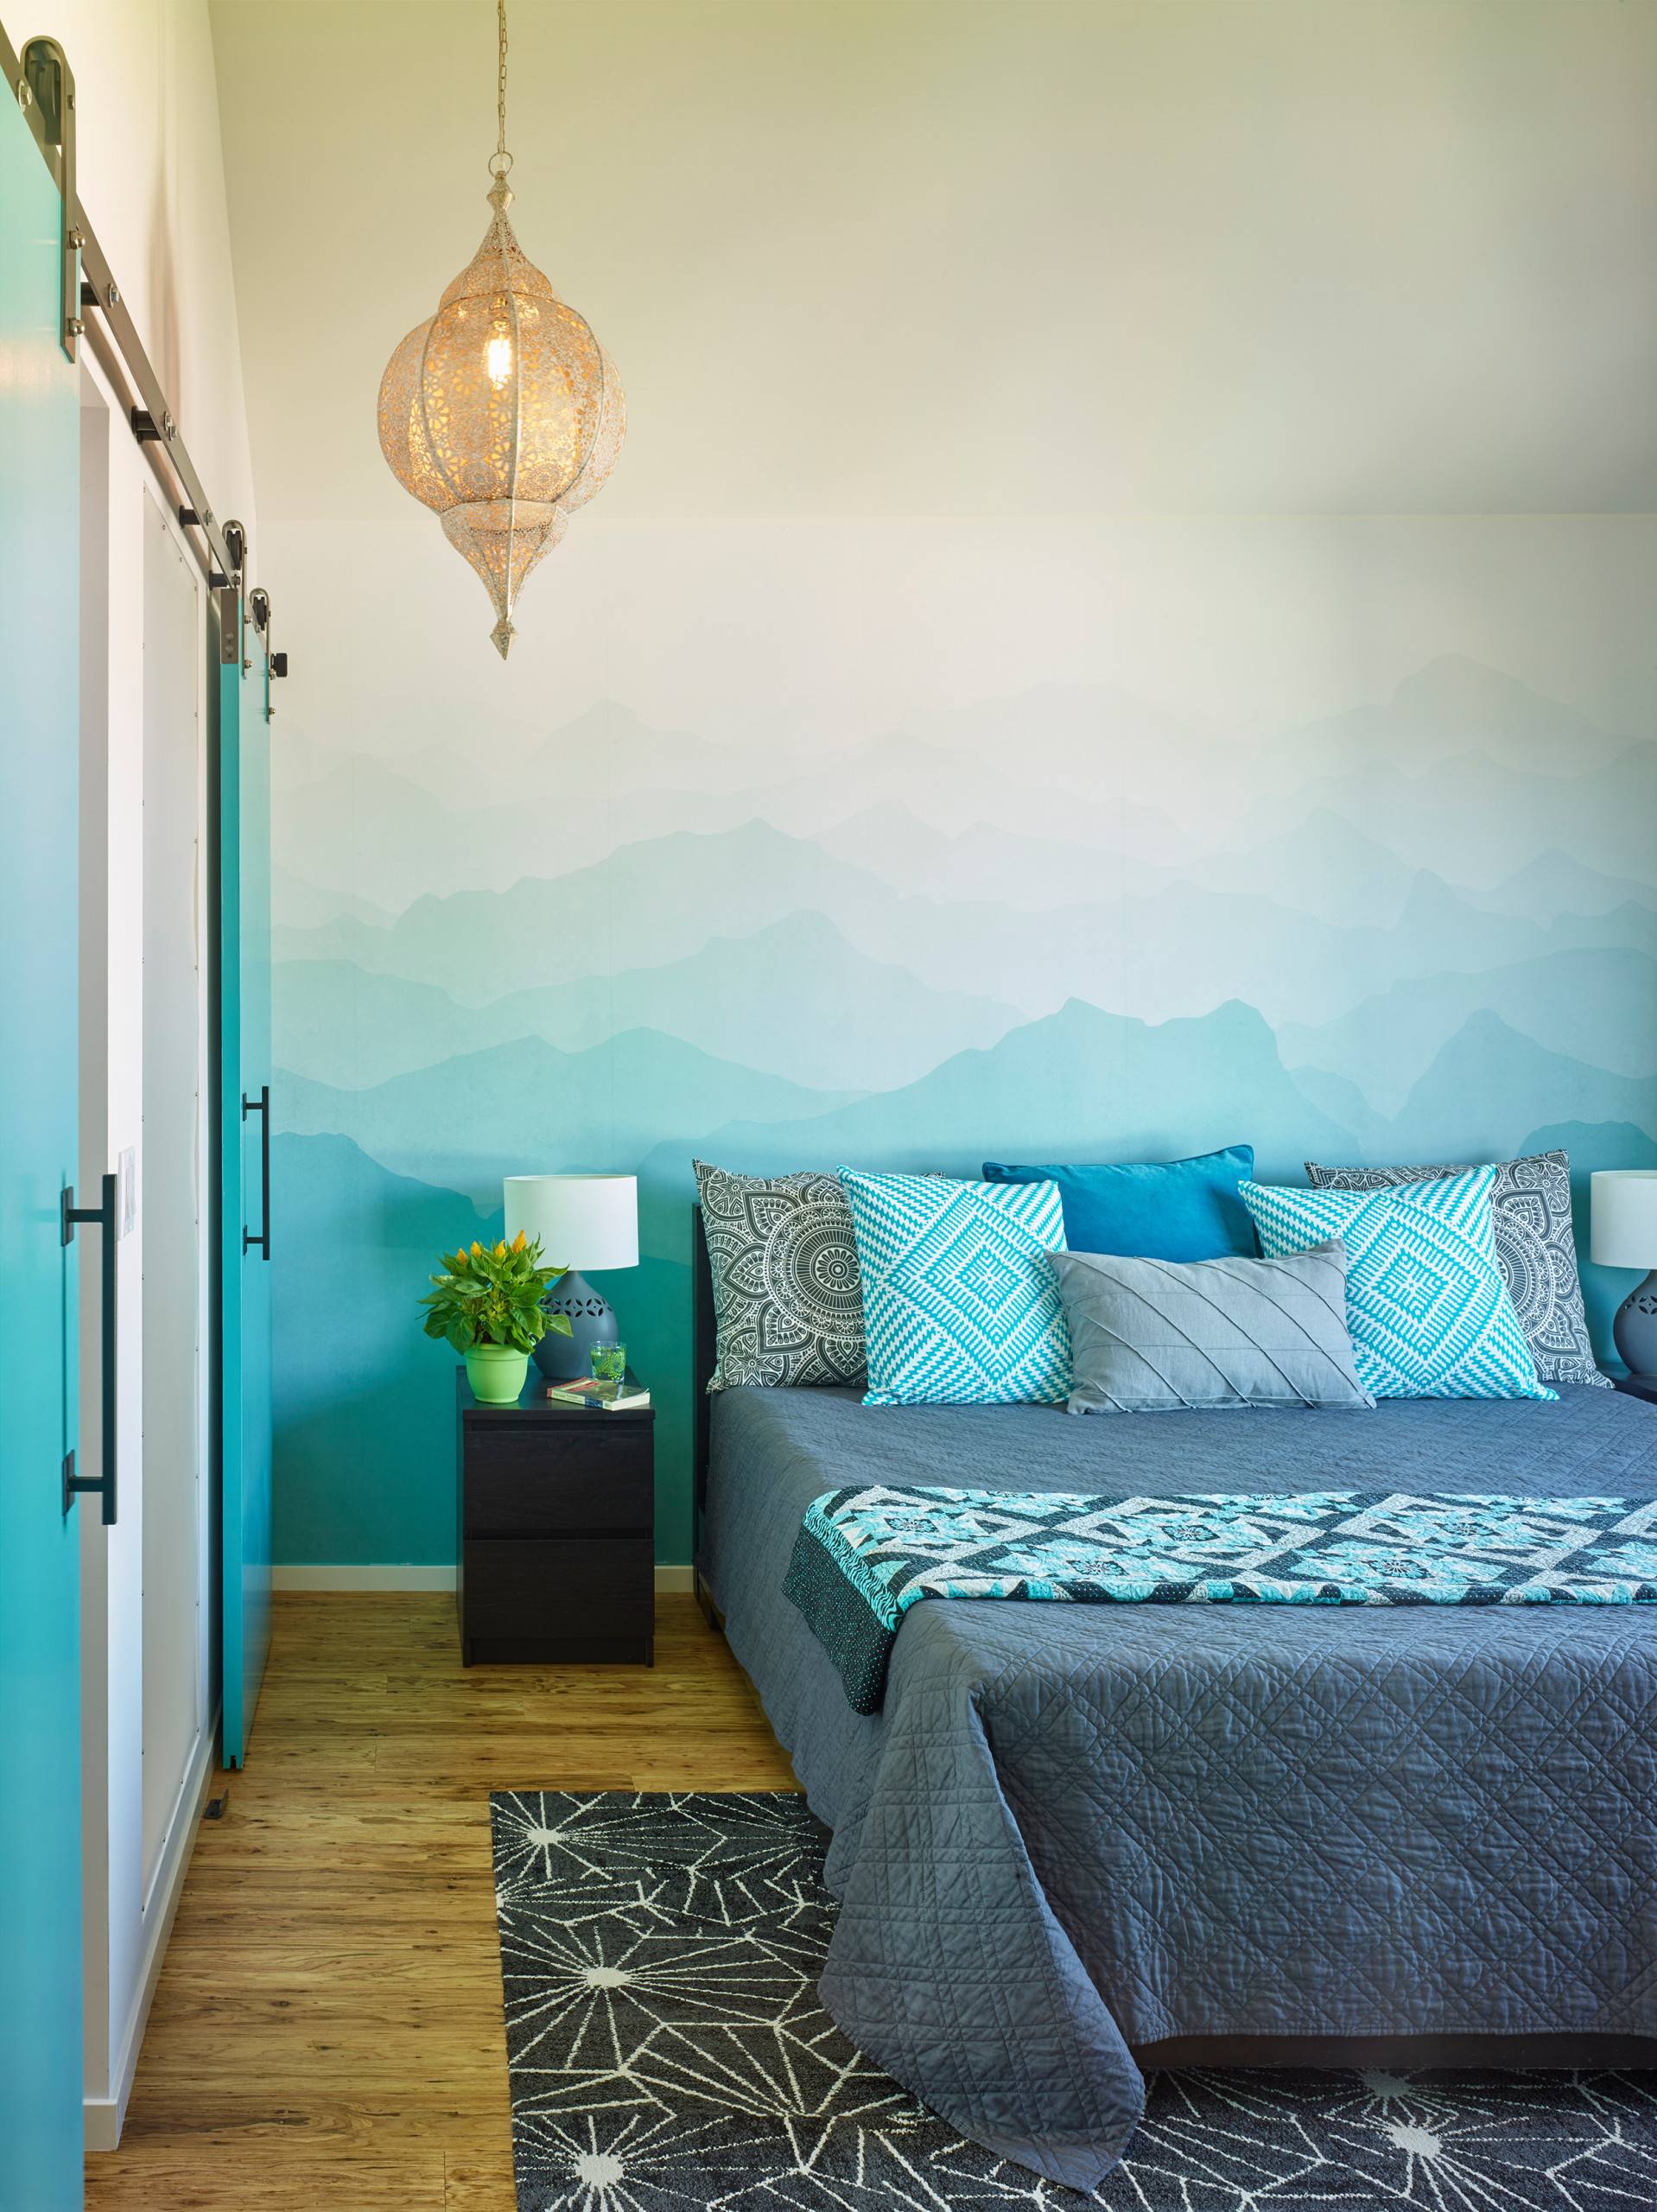 Sky blue as the main focal point (from Houzz)